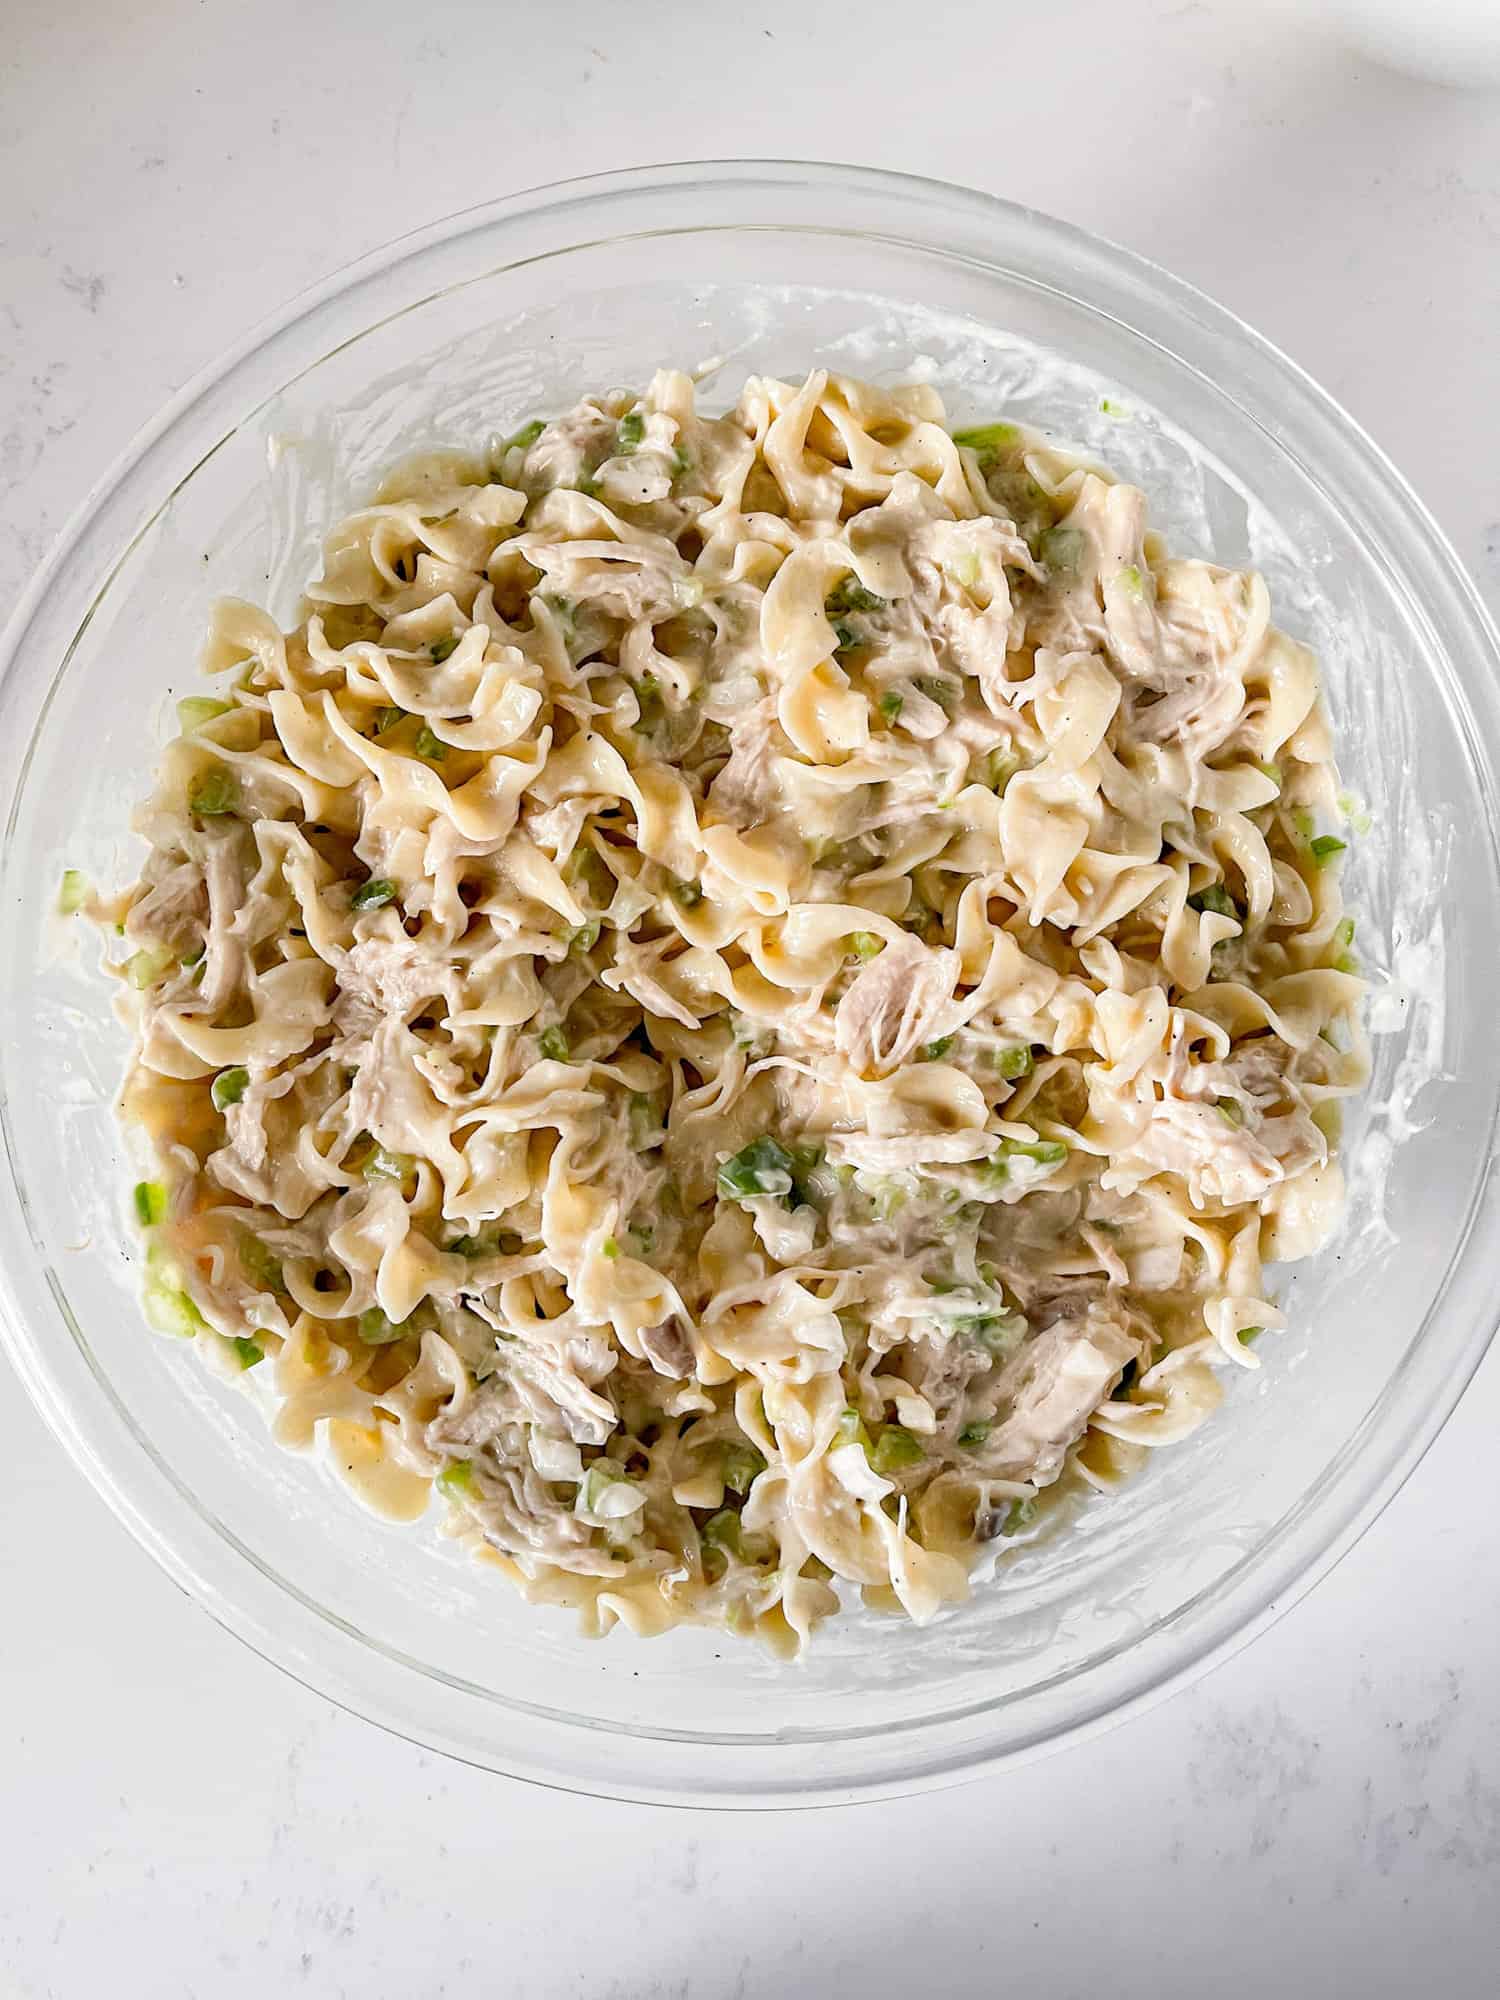 Chicken tetrazzini mixed in a large glass bowl